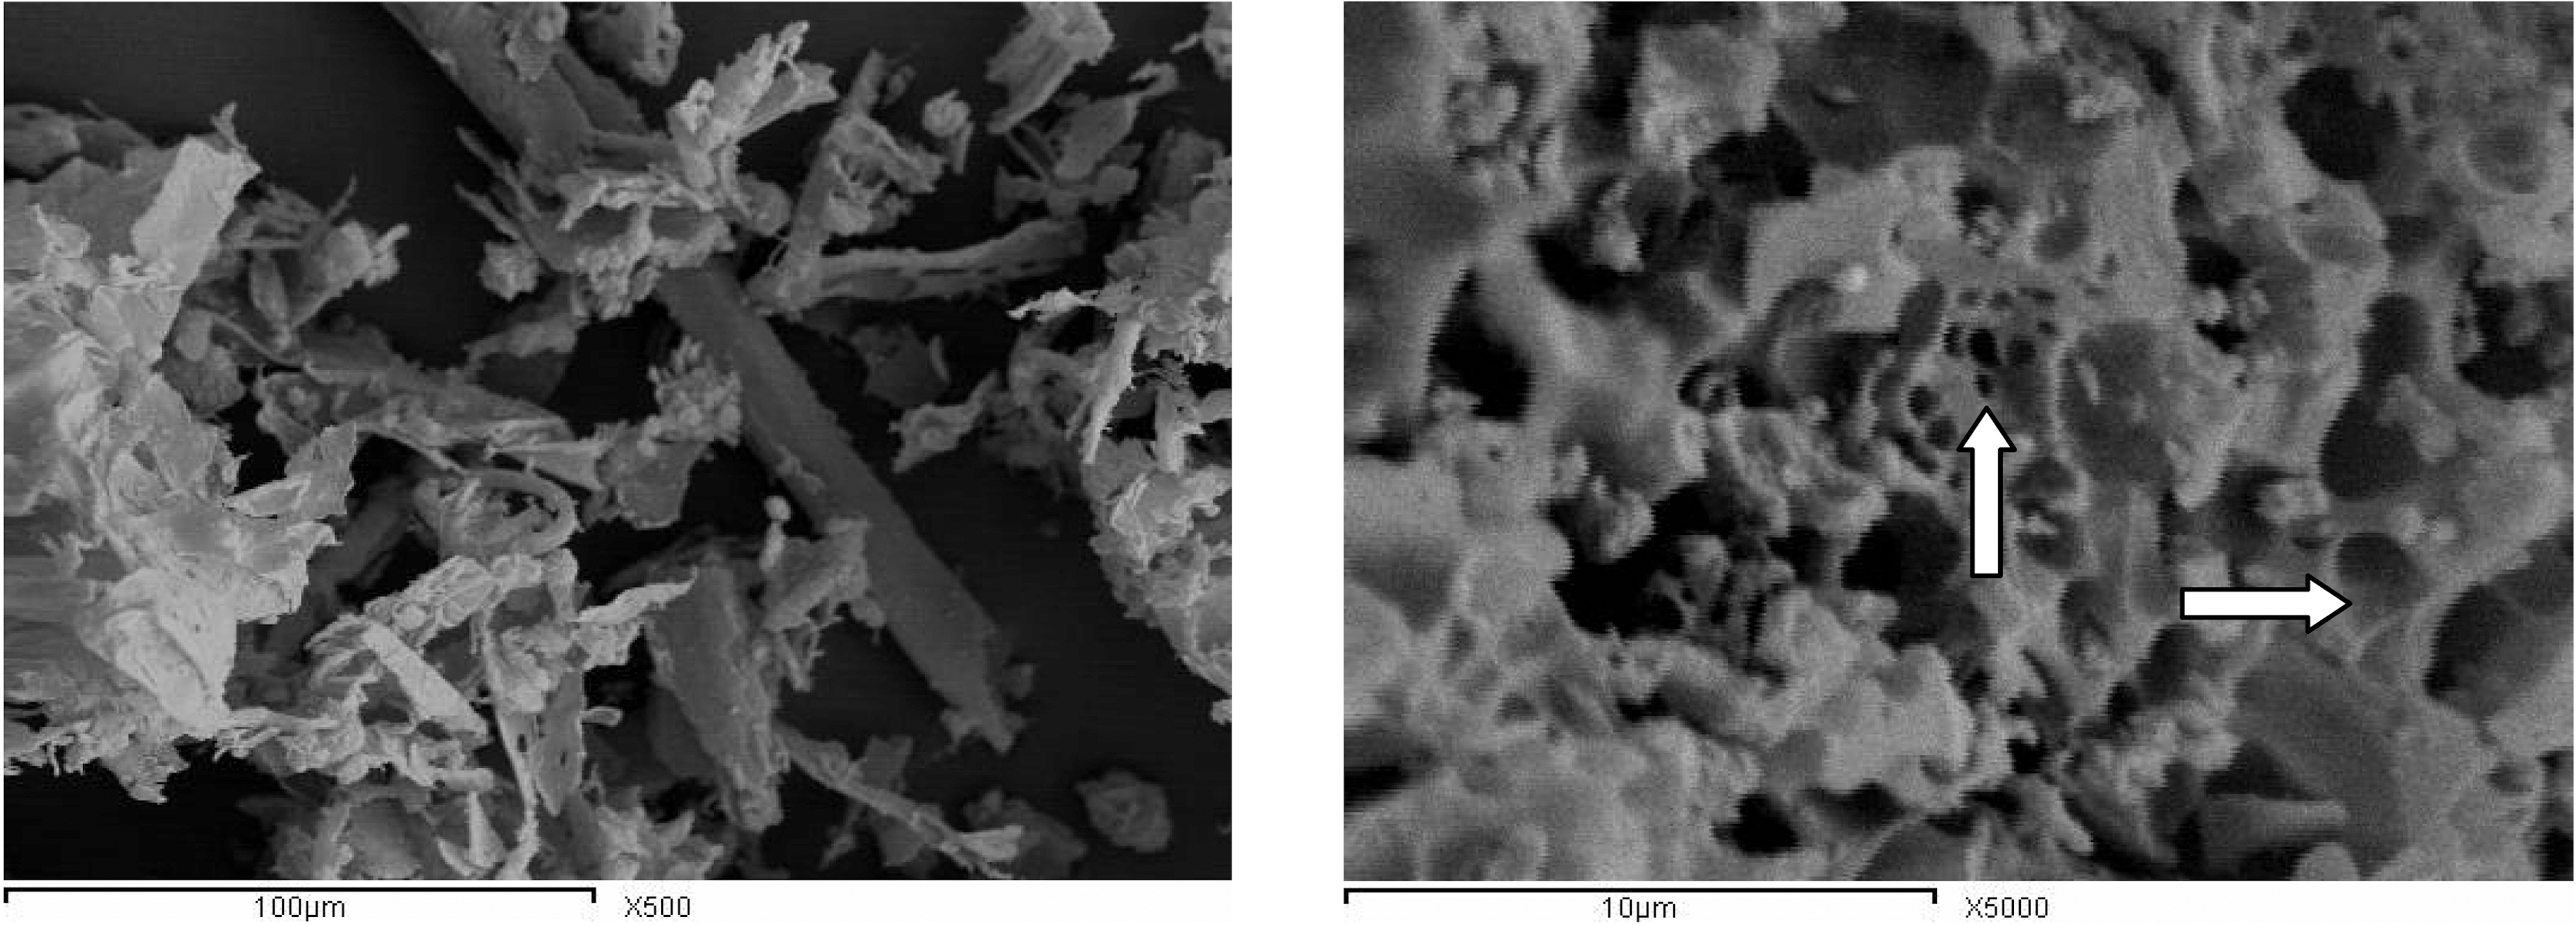 SEM micrographs of cotton stalks (left) and CCS-1K800 (right).